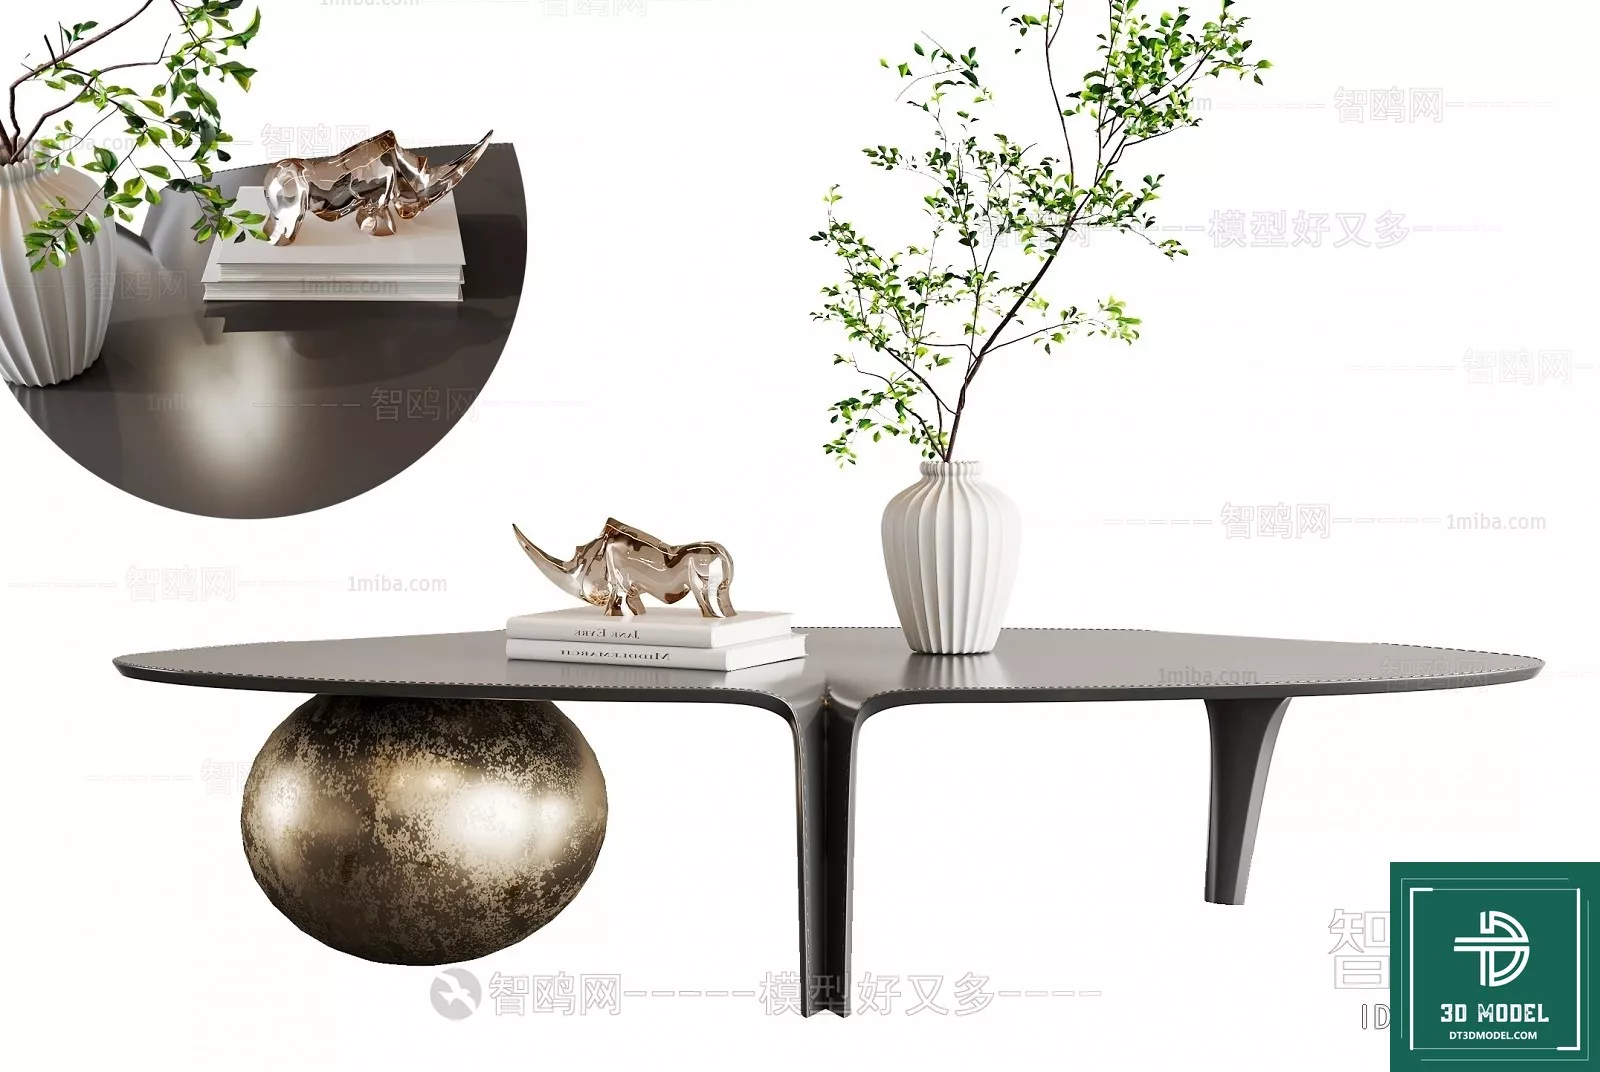 MODERN TEA TABLE - SKETCHUP 3D MODEL - VRAY OR ENSCAPE - ID14961